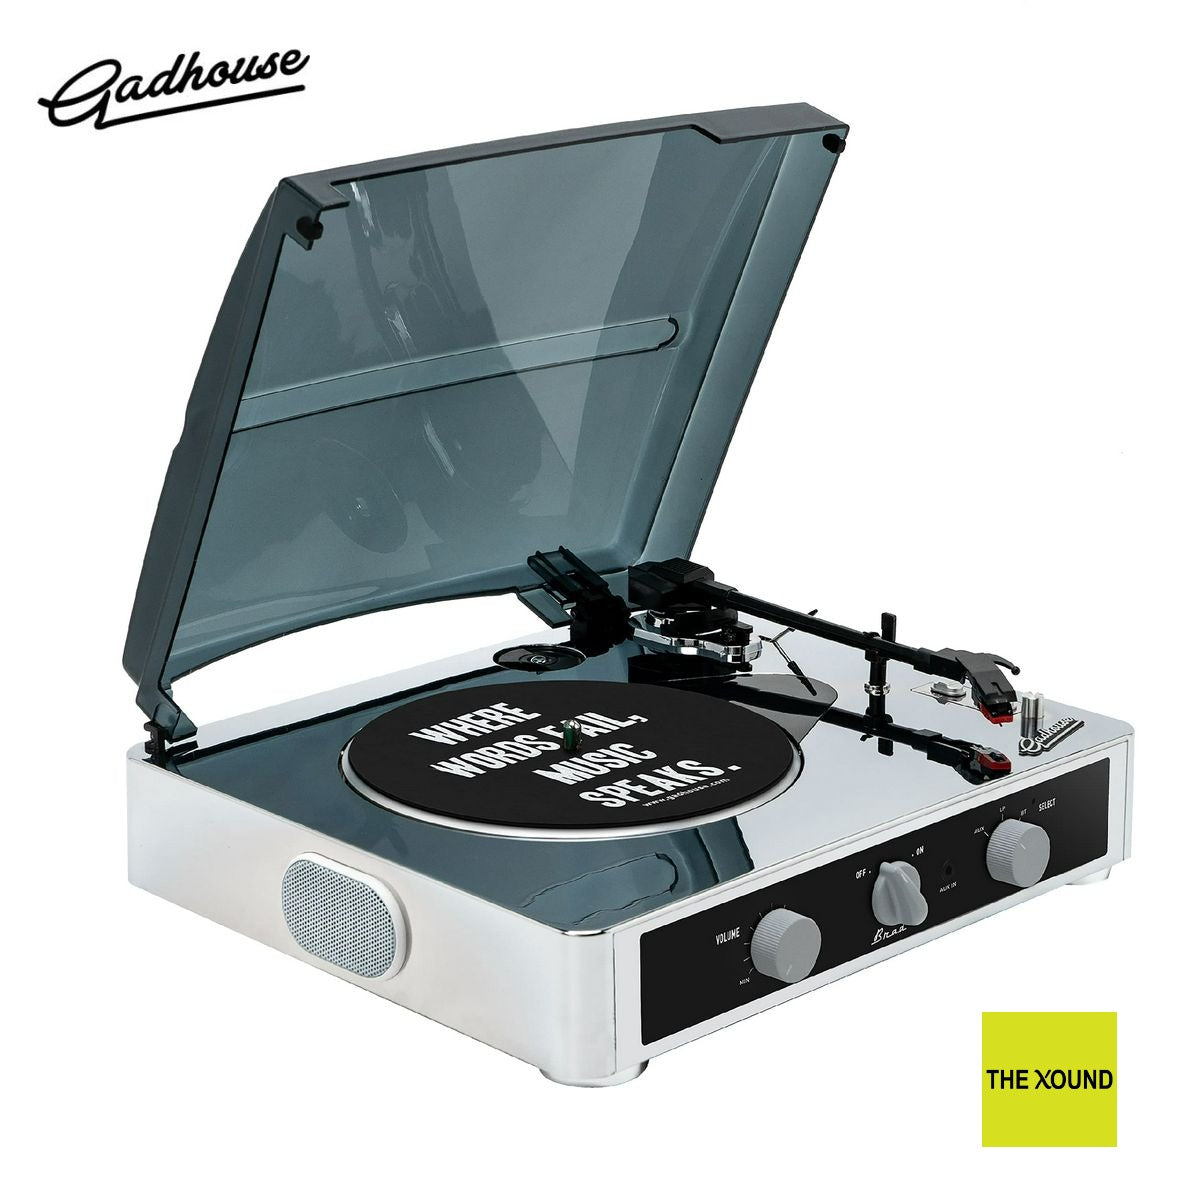 GADHOUSE Brad Retro Record Player Limited Edition Turntable